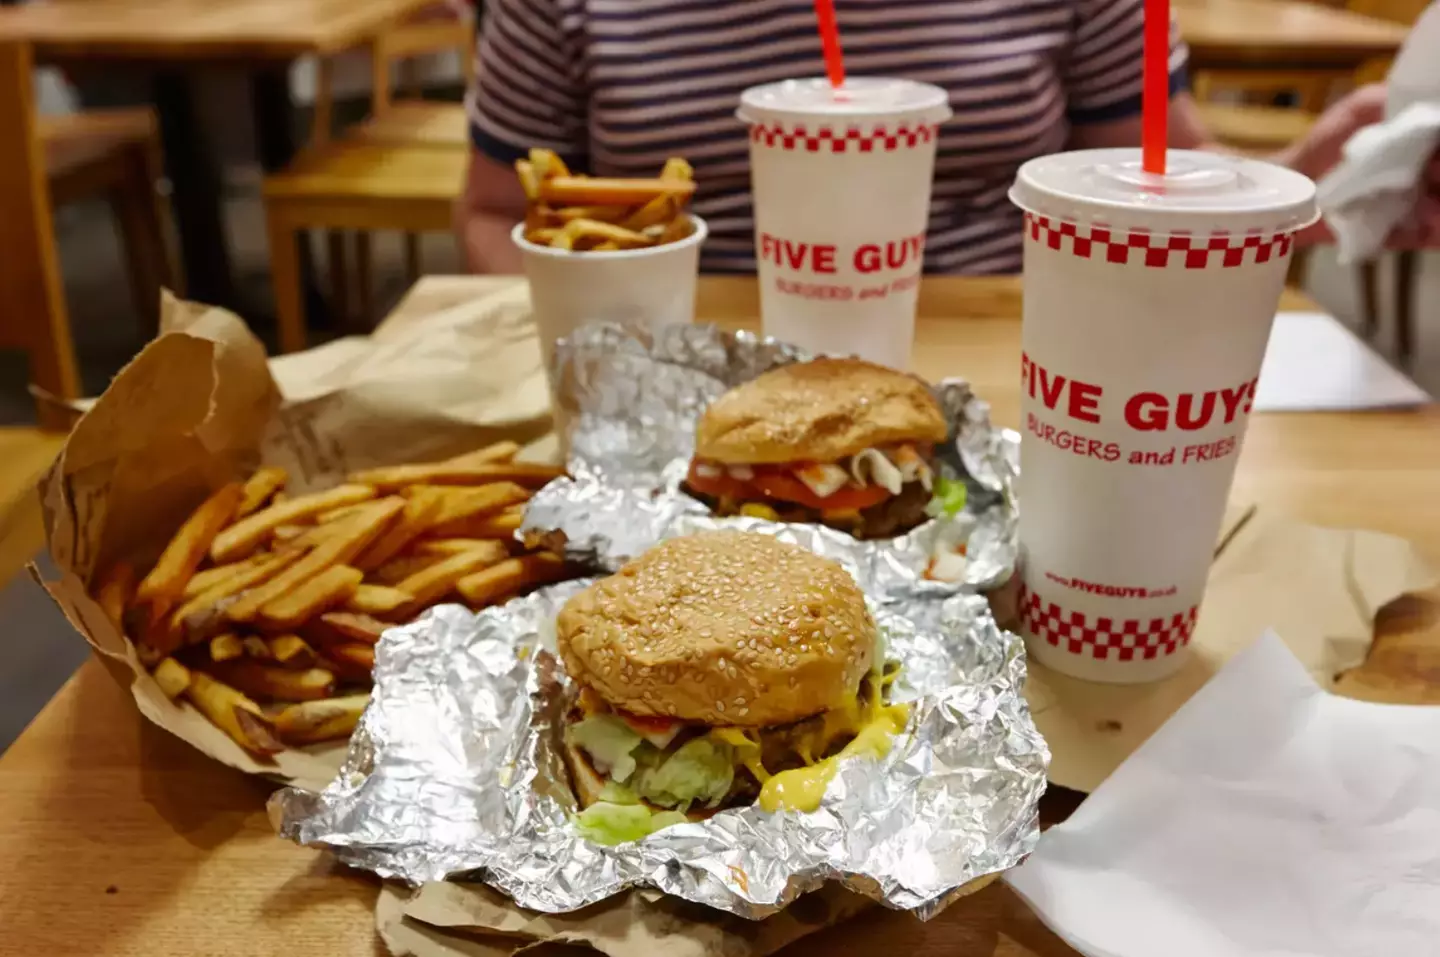 An explanation for the prices at Five Guys has finally been provided.